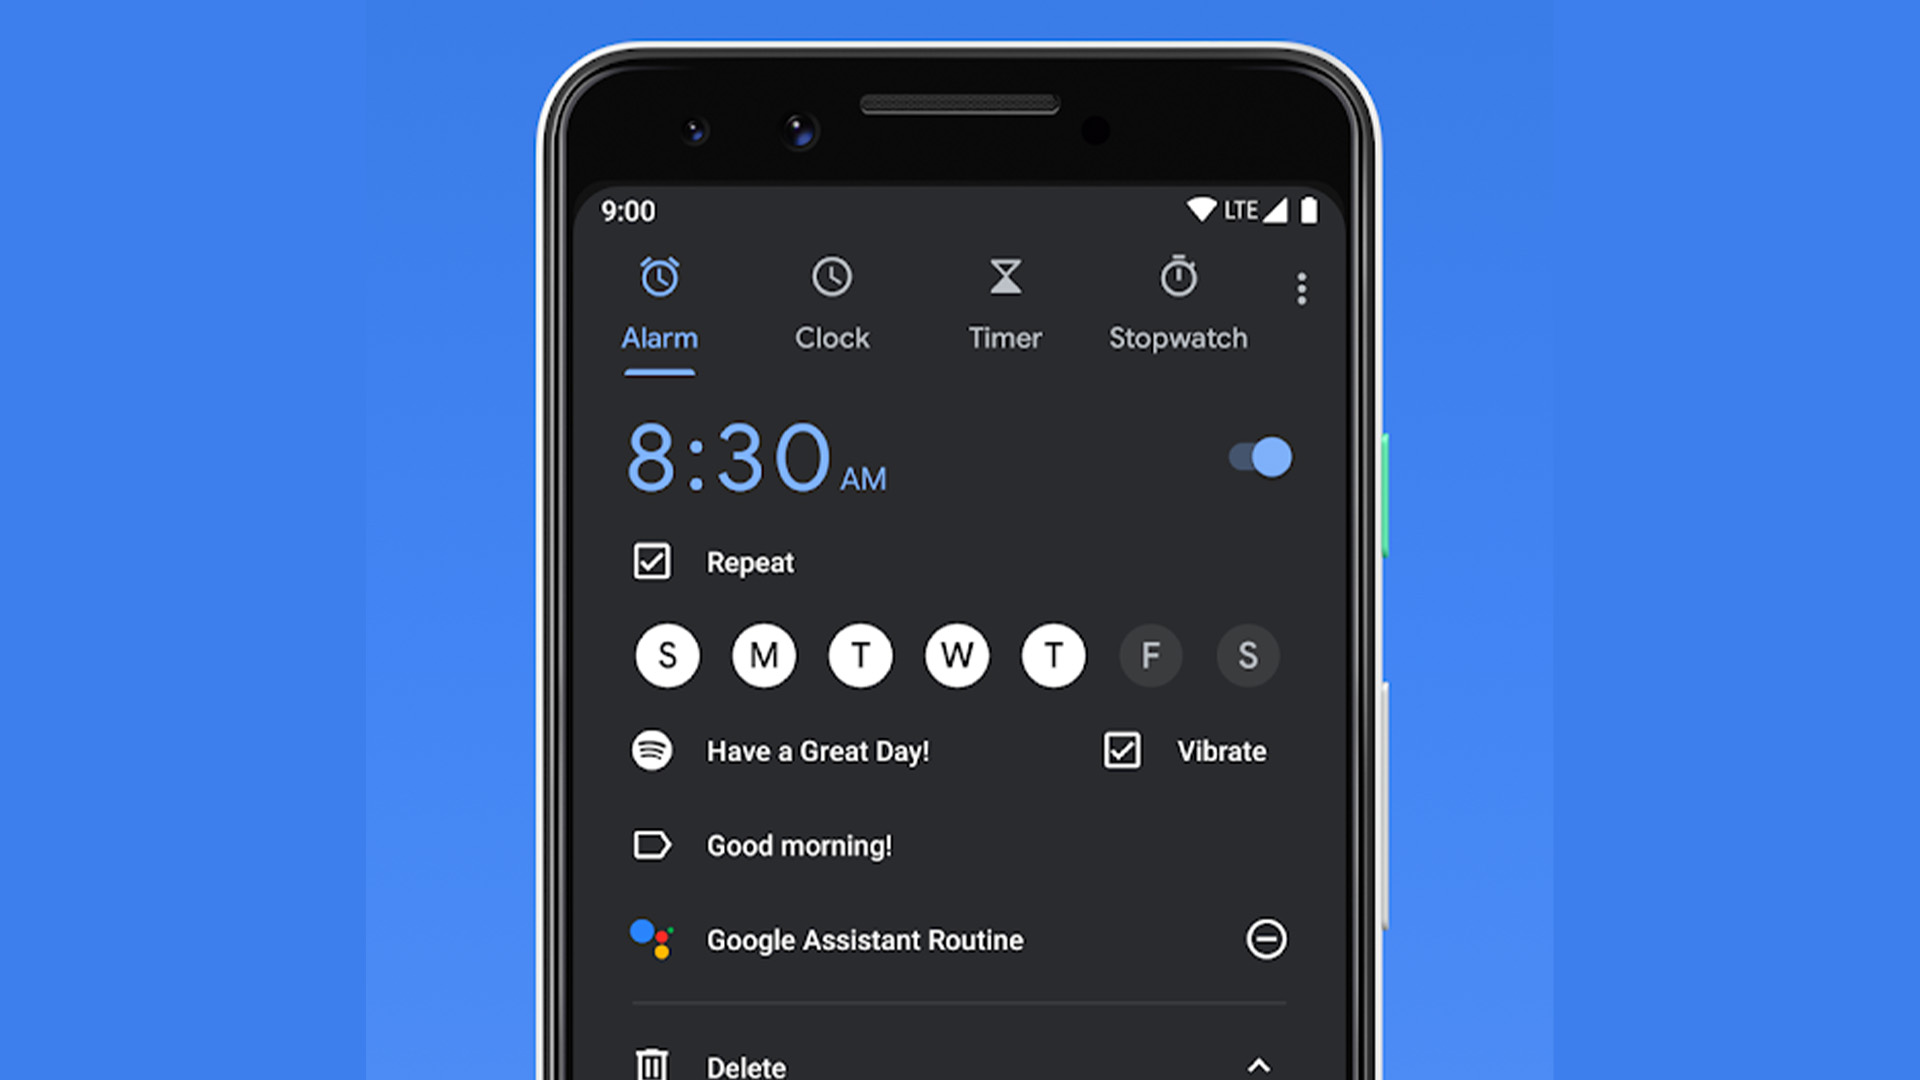 The best clock apps and digital clock apps for Android - Android Authority